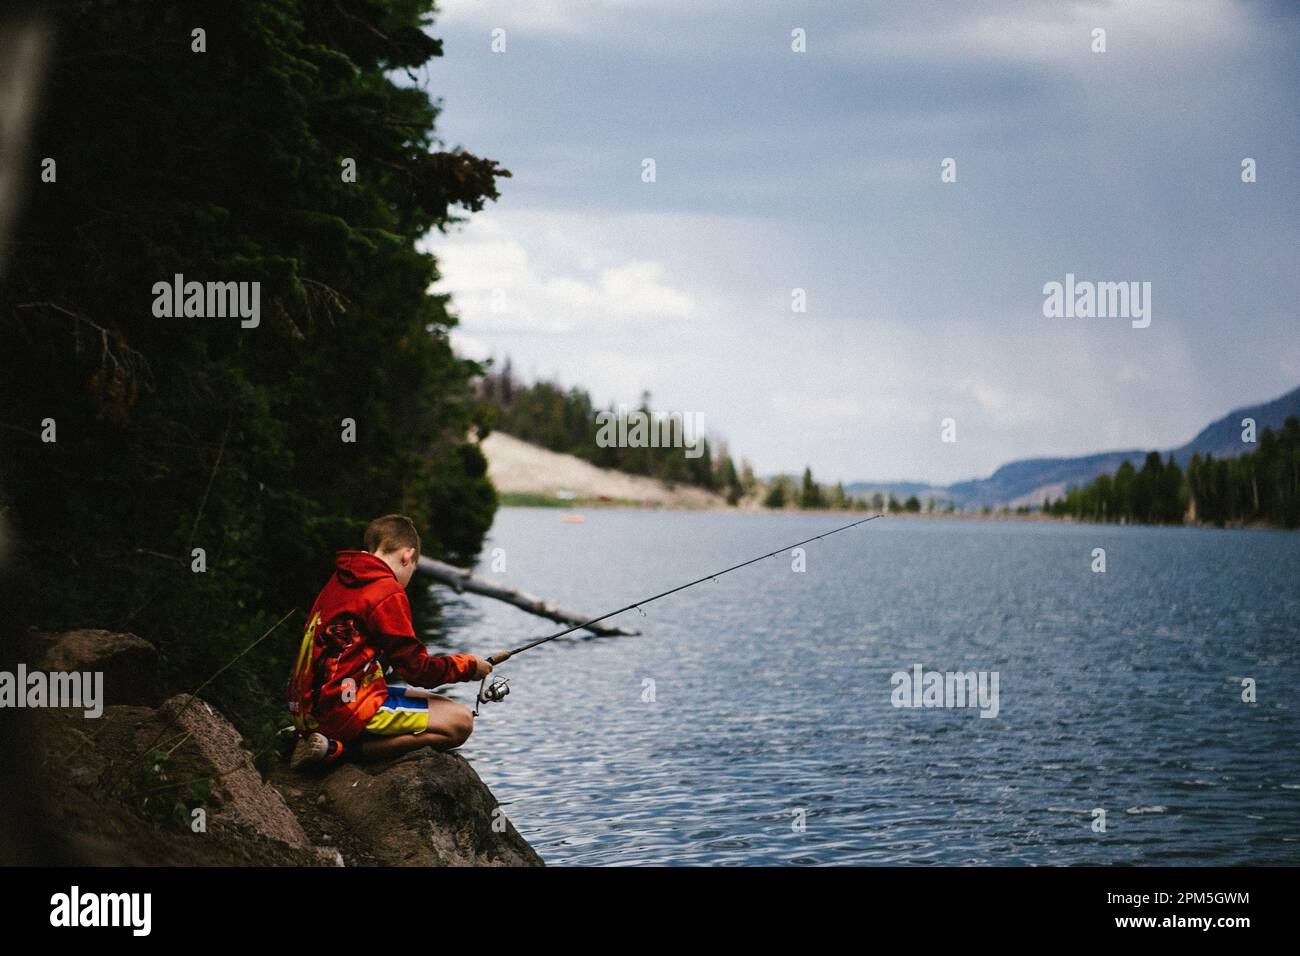 Boy fishing in a lake in mountains with forest around him Stock Photo